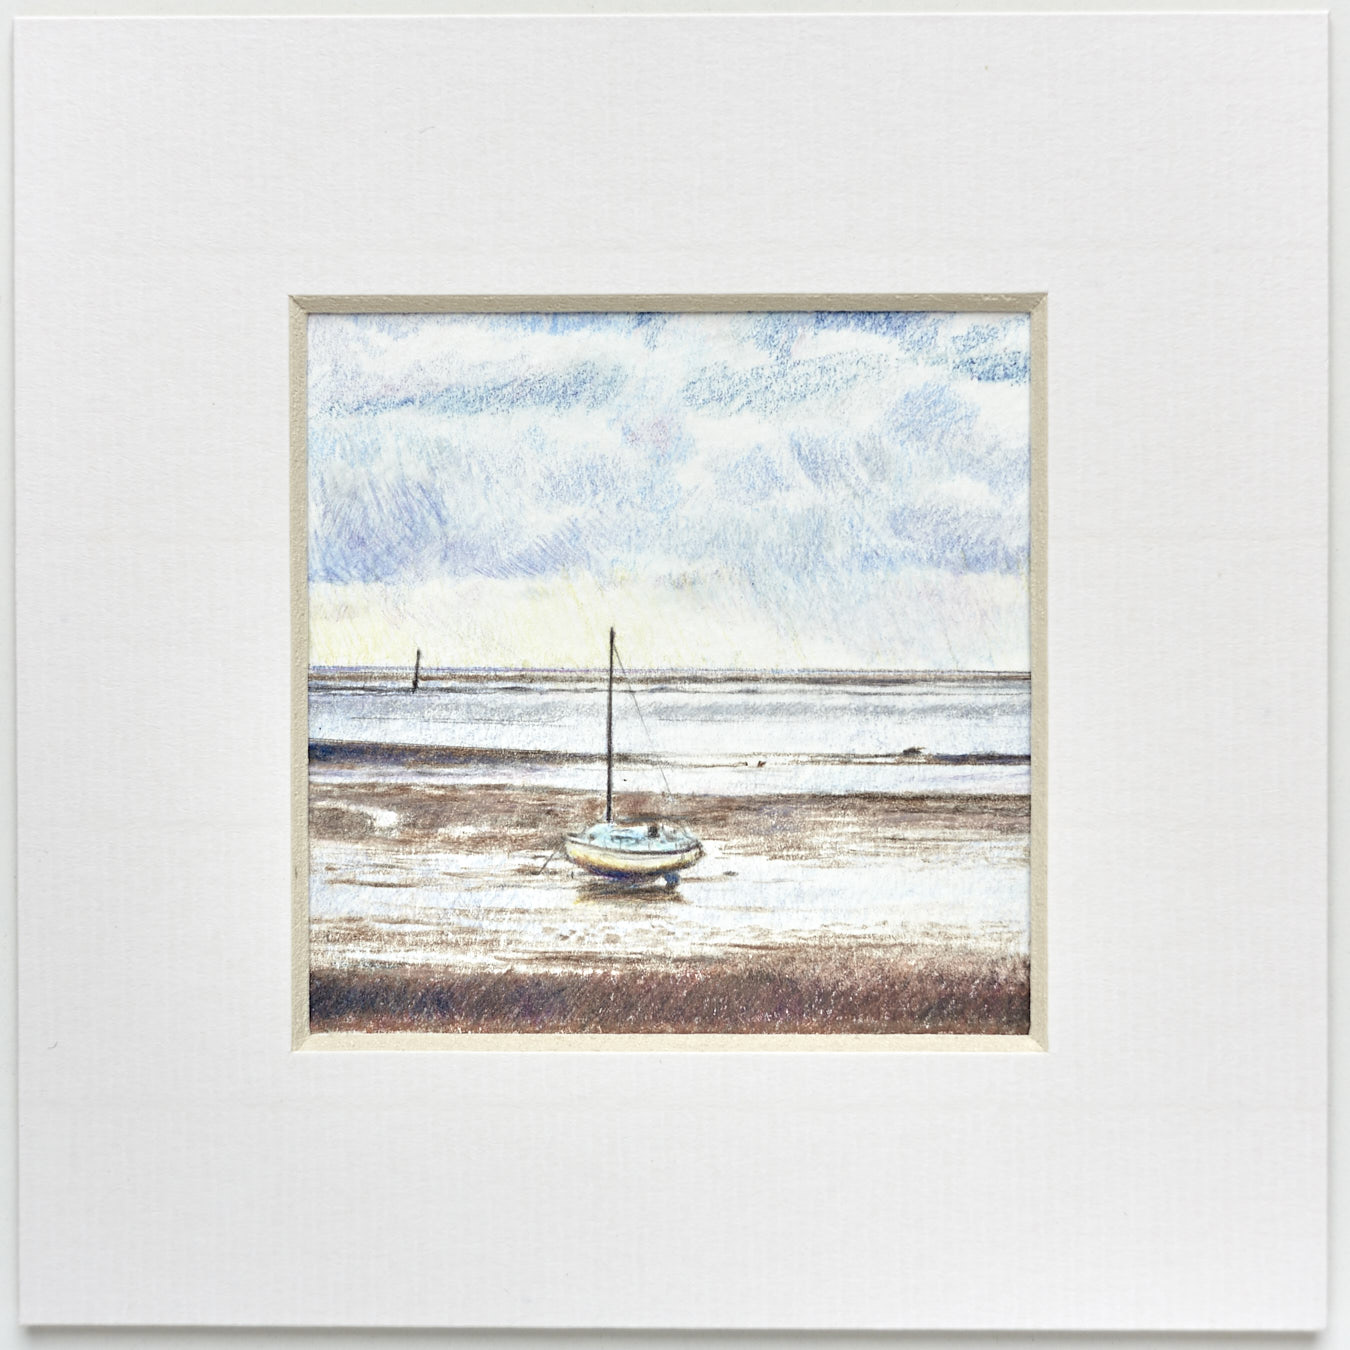 Large image of original colour pencil drawing Boat on Lytham beach by Timothy Gent